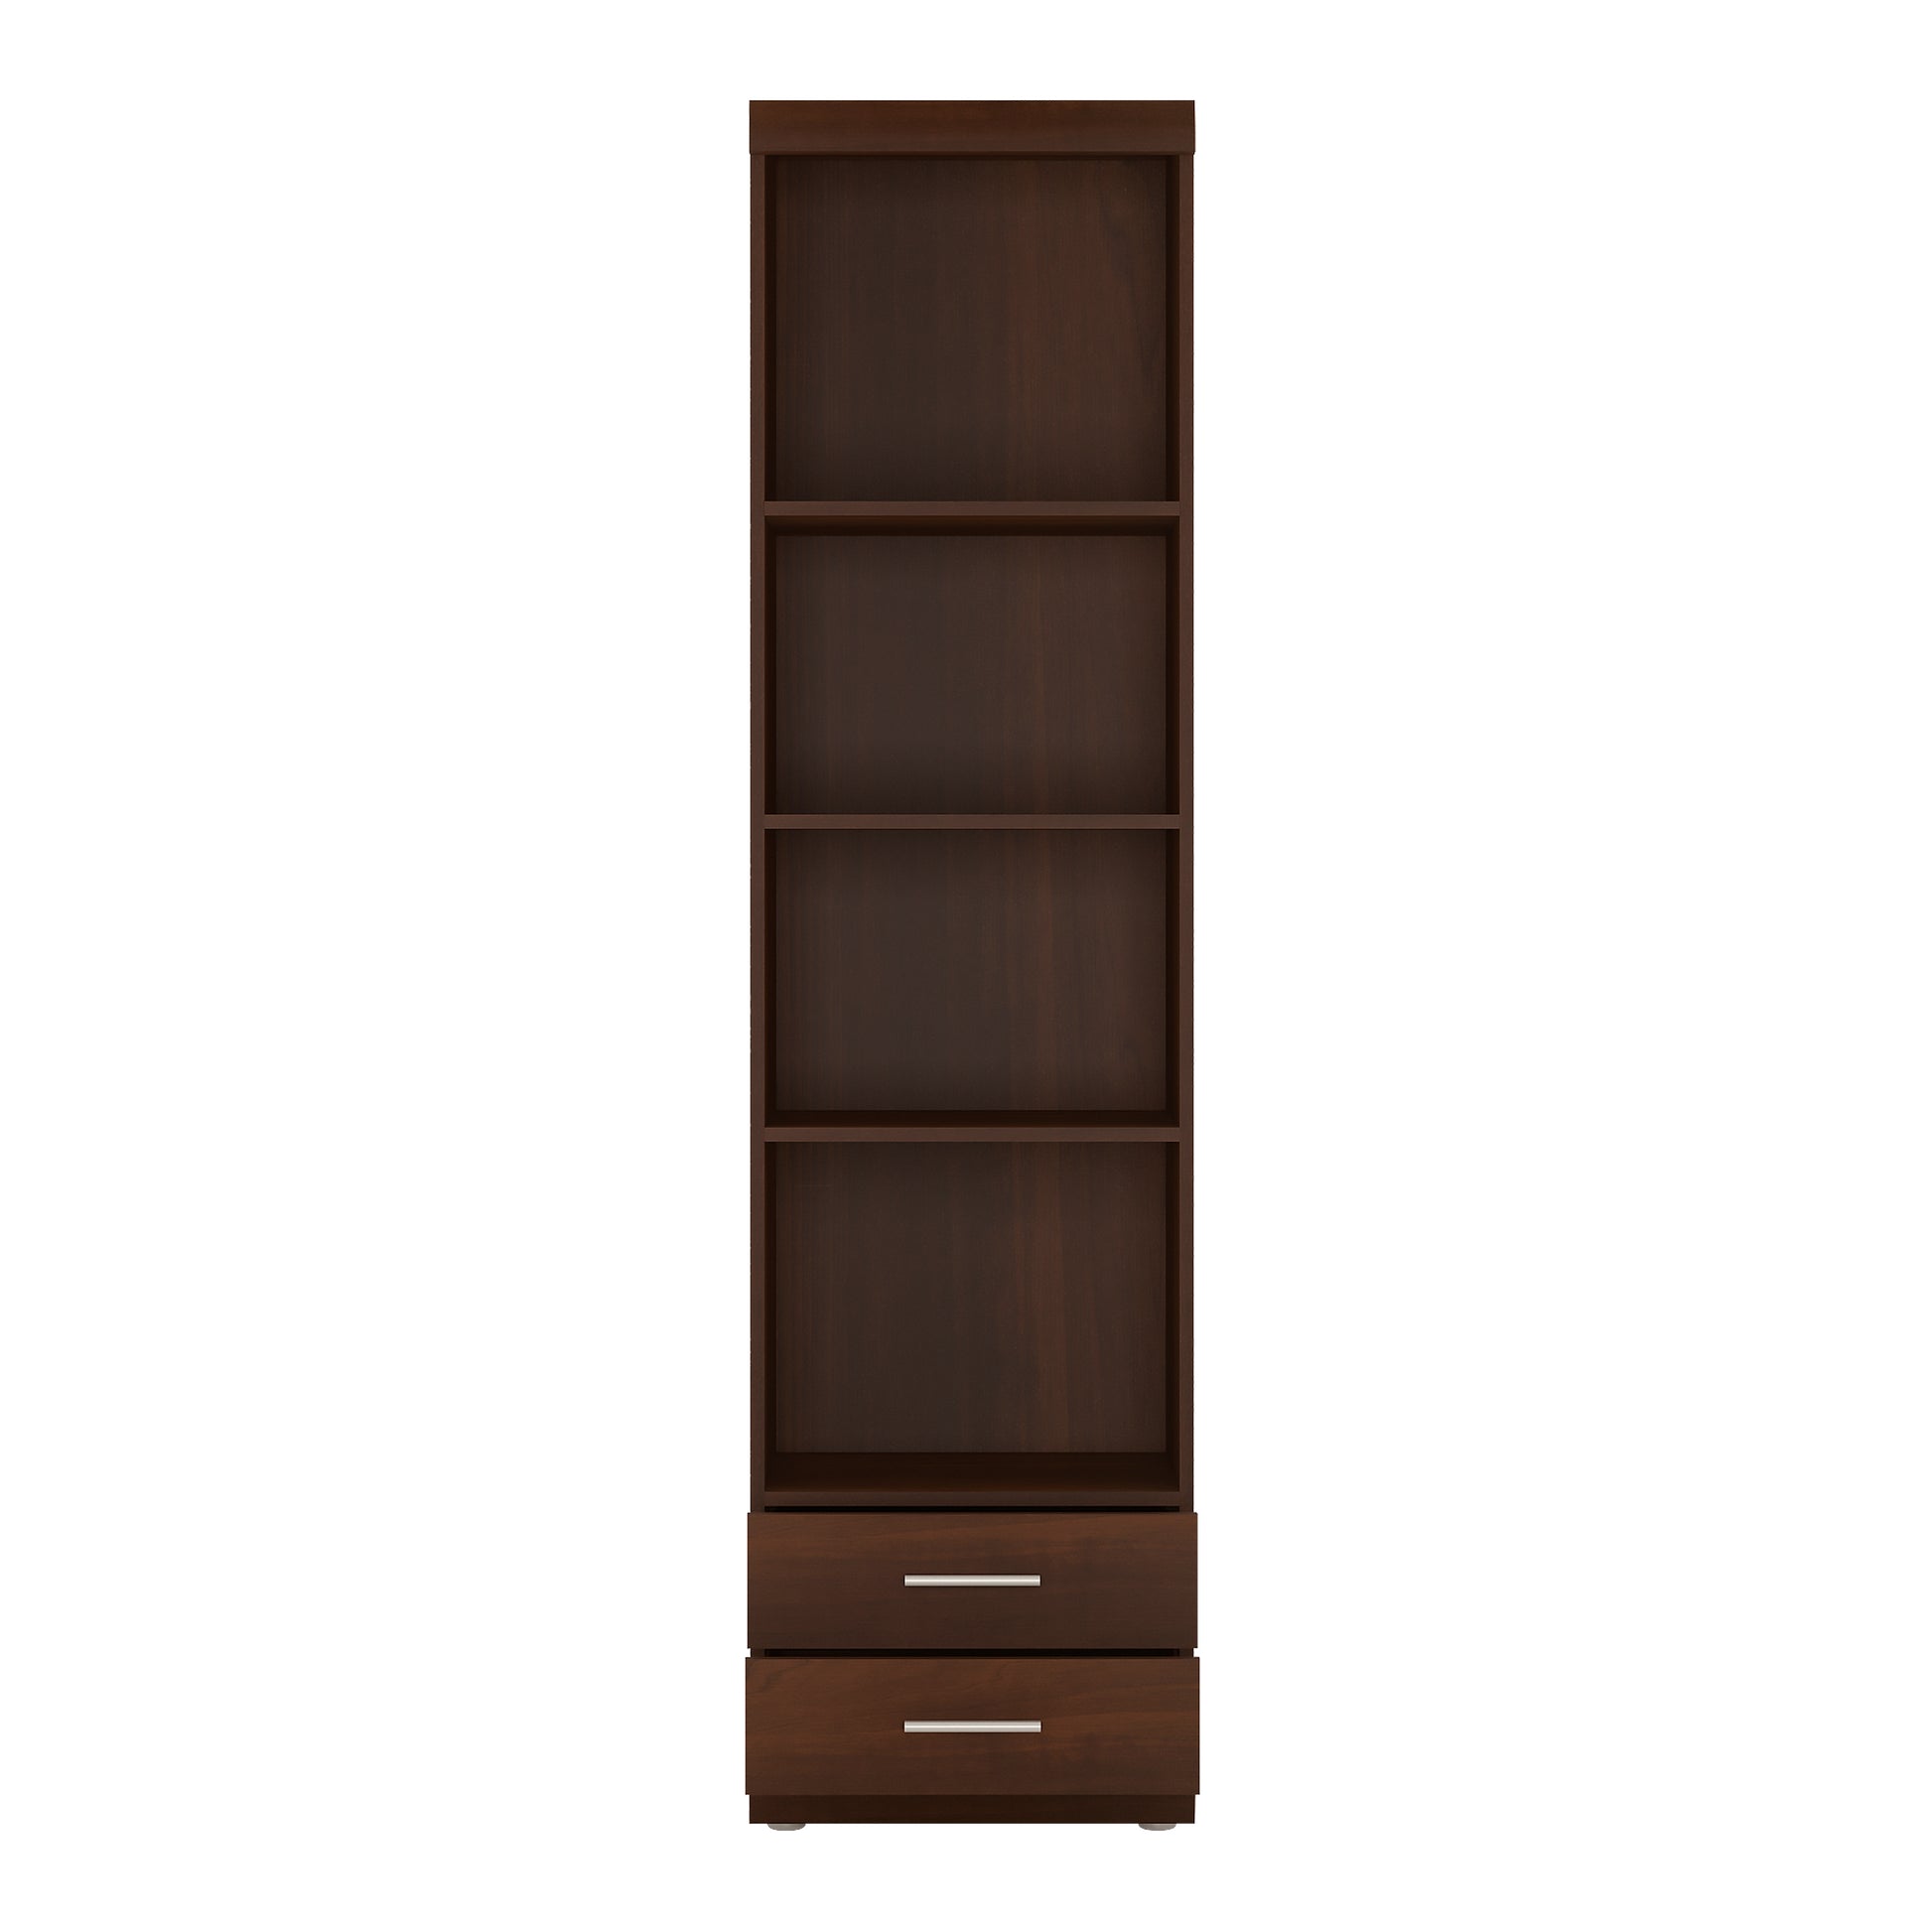 Imperial  Tall 2 Drawer Narrow Cabinet with Open Shelving in Dark Mahogany Melamine